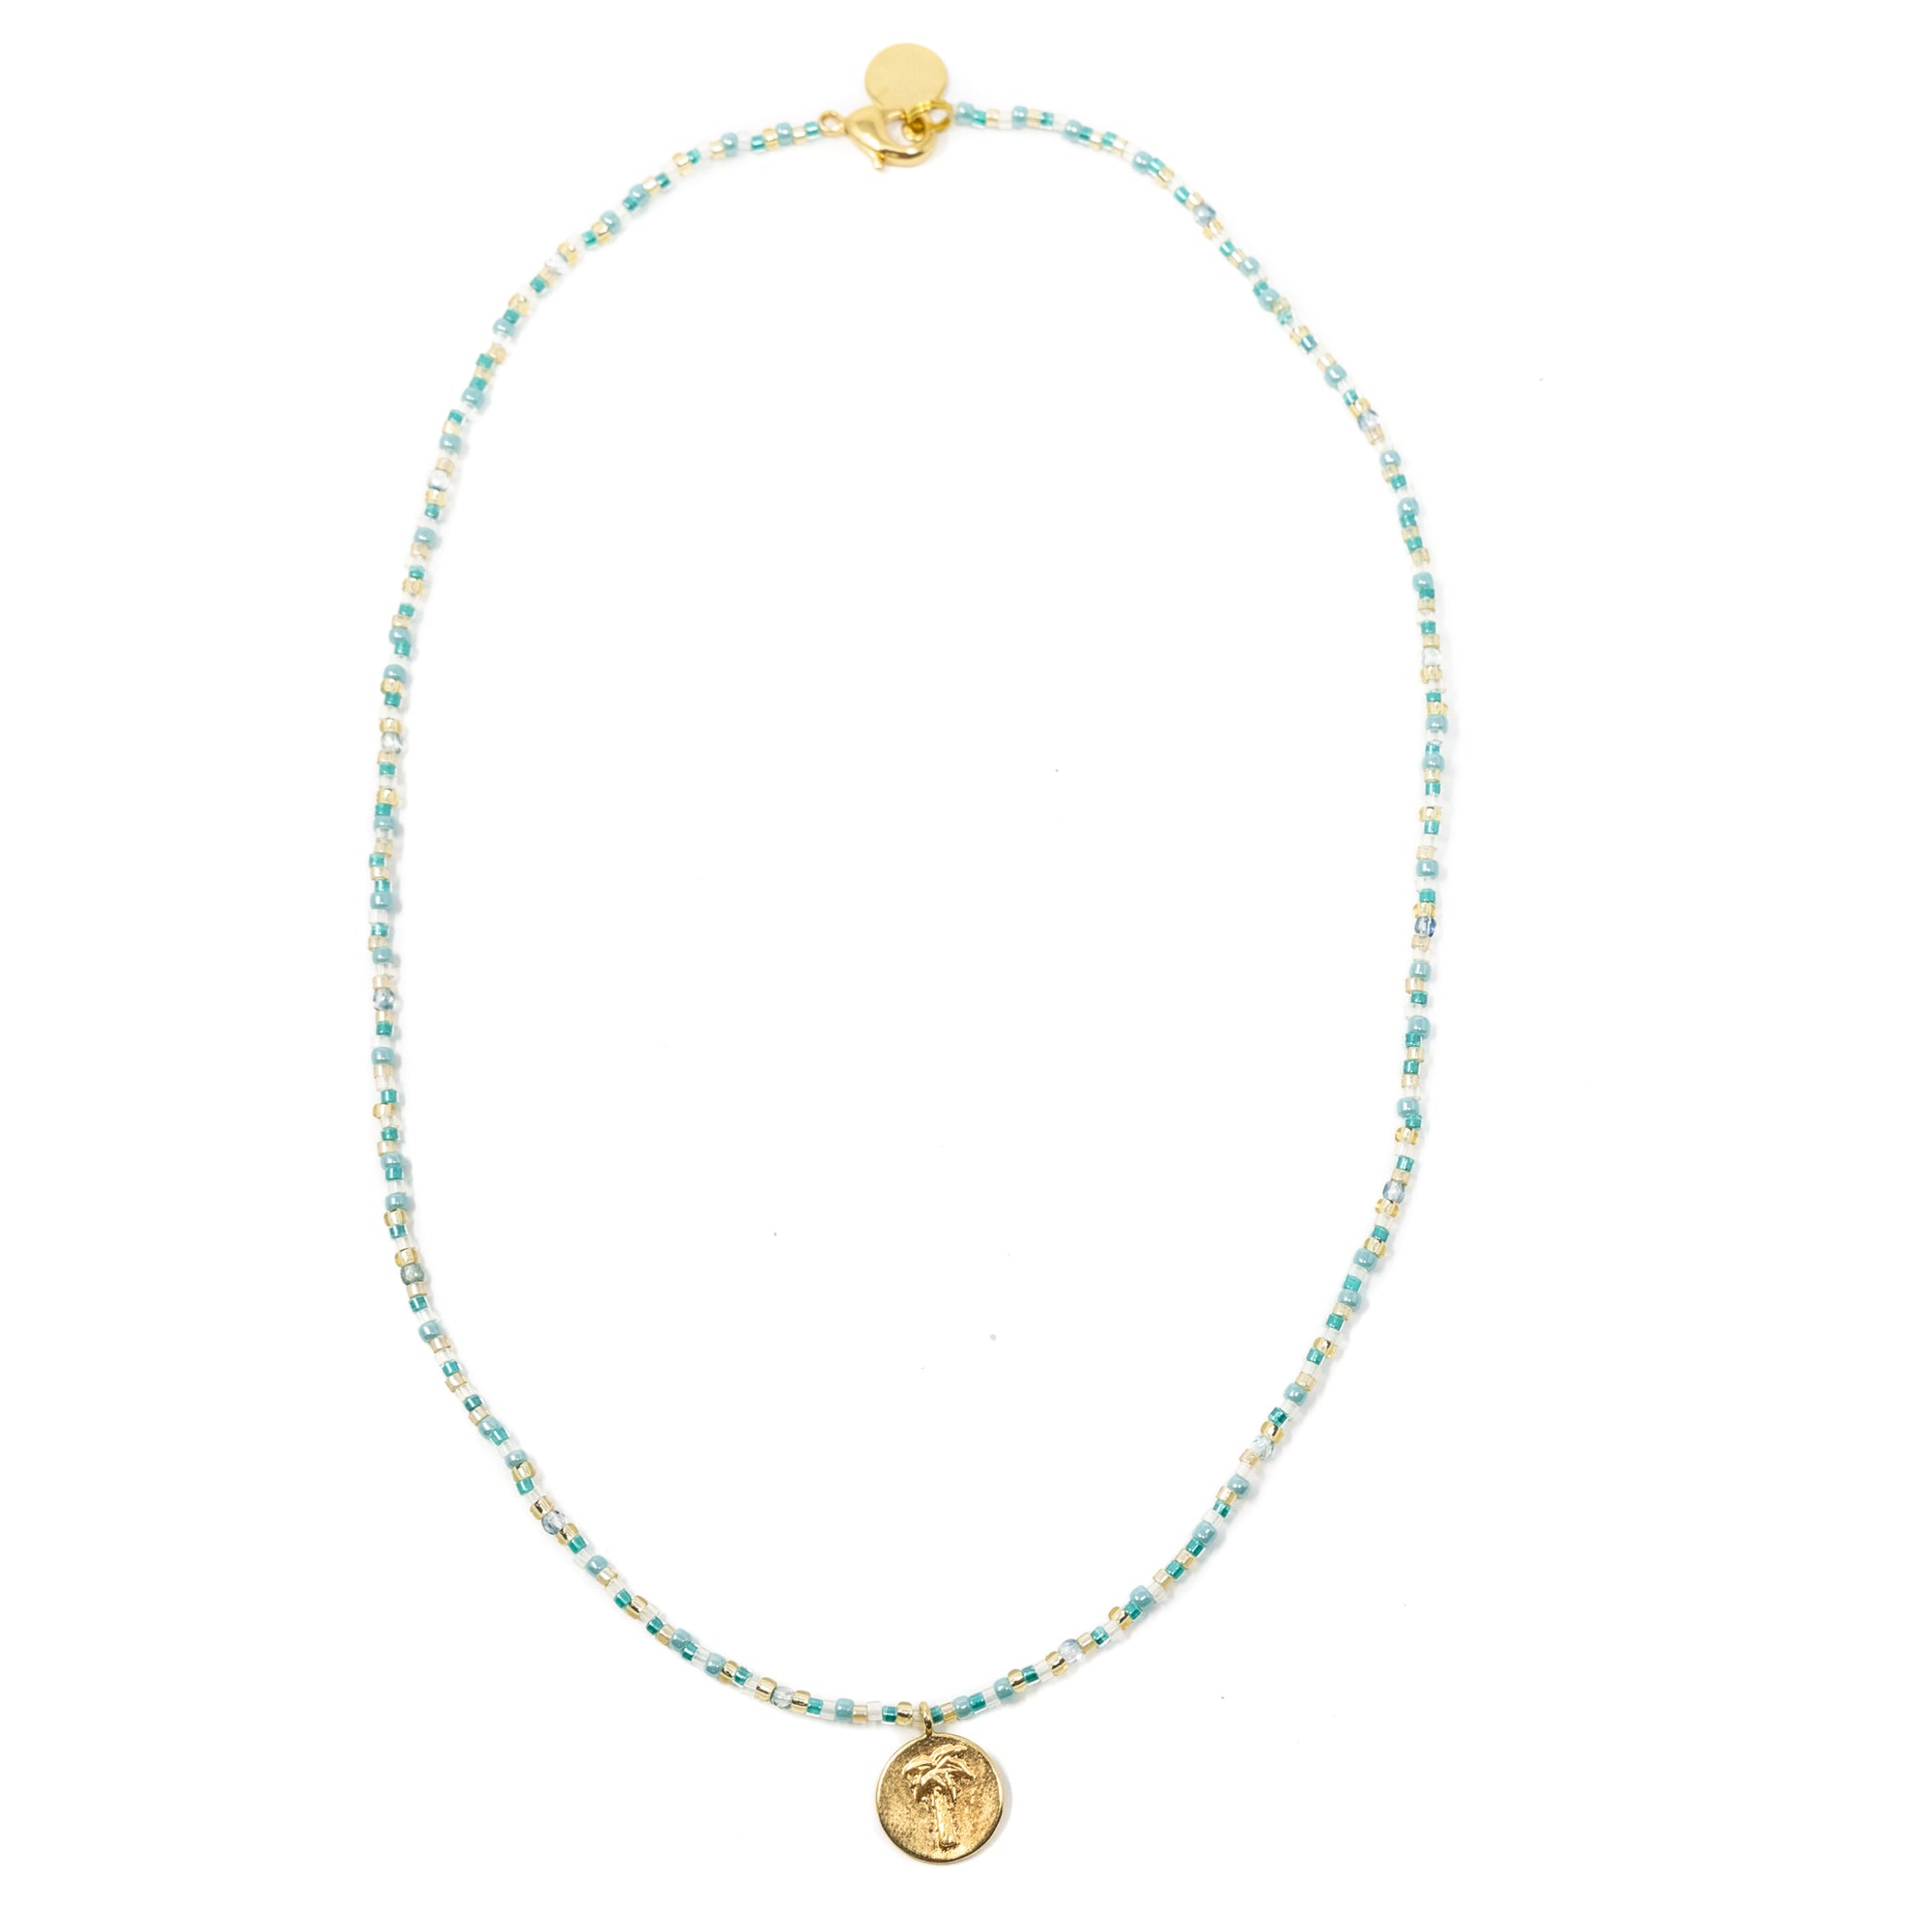 Teal & Gold Shine Bright Palm Charm Necklace